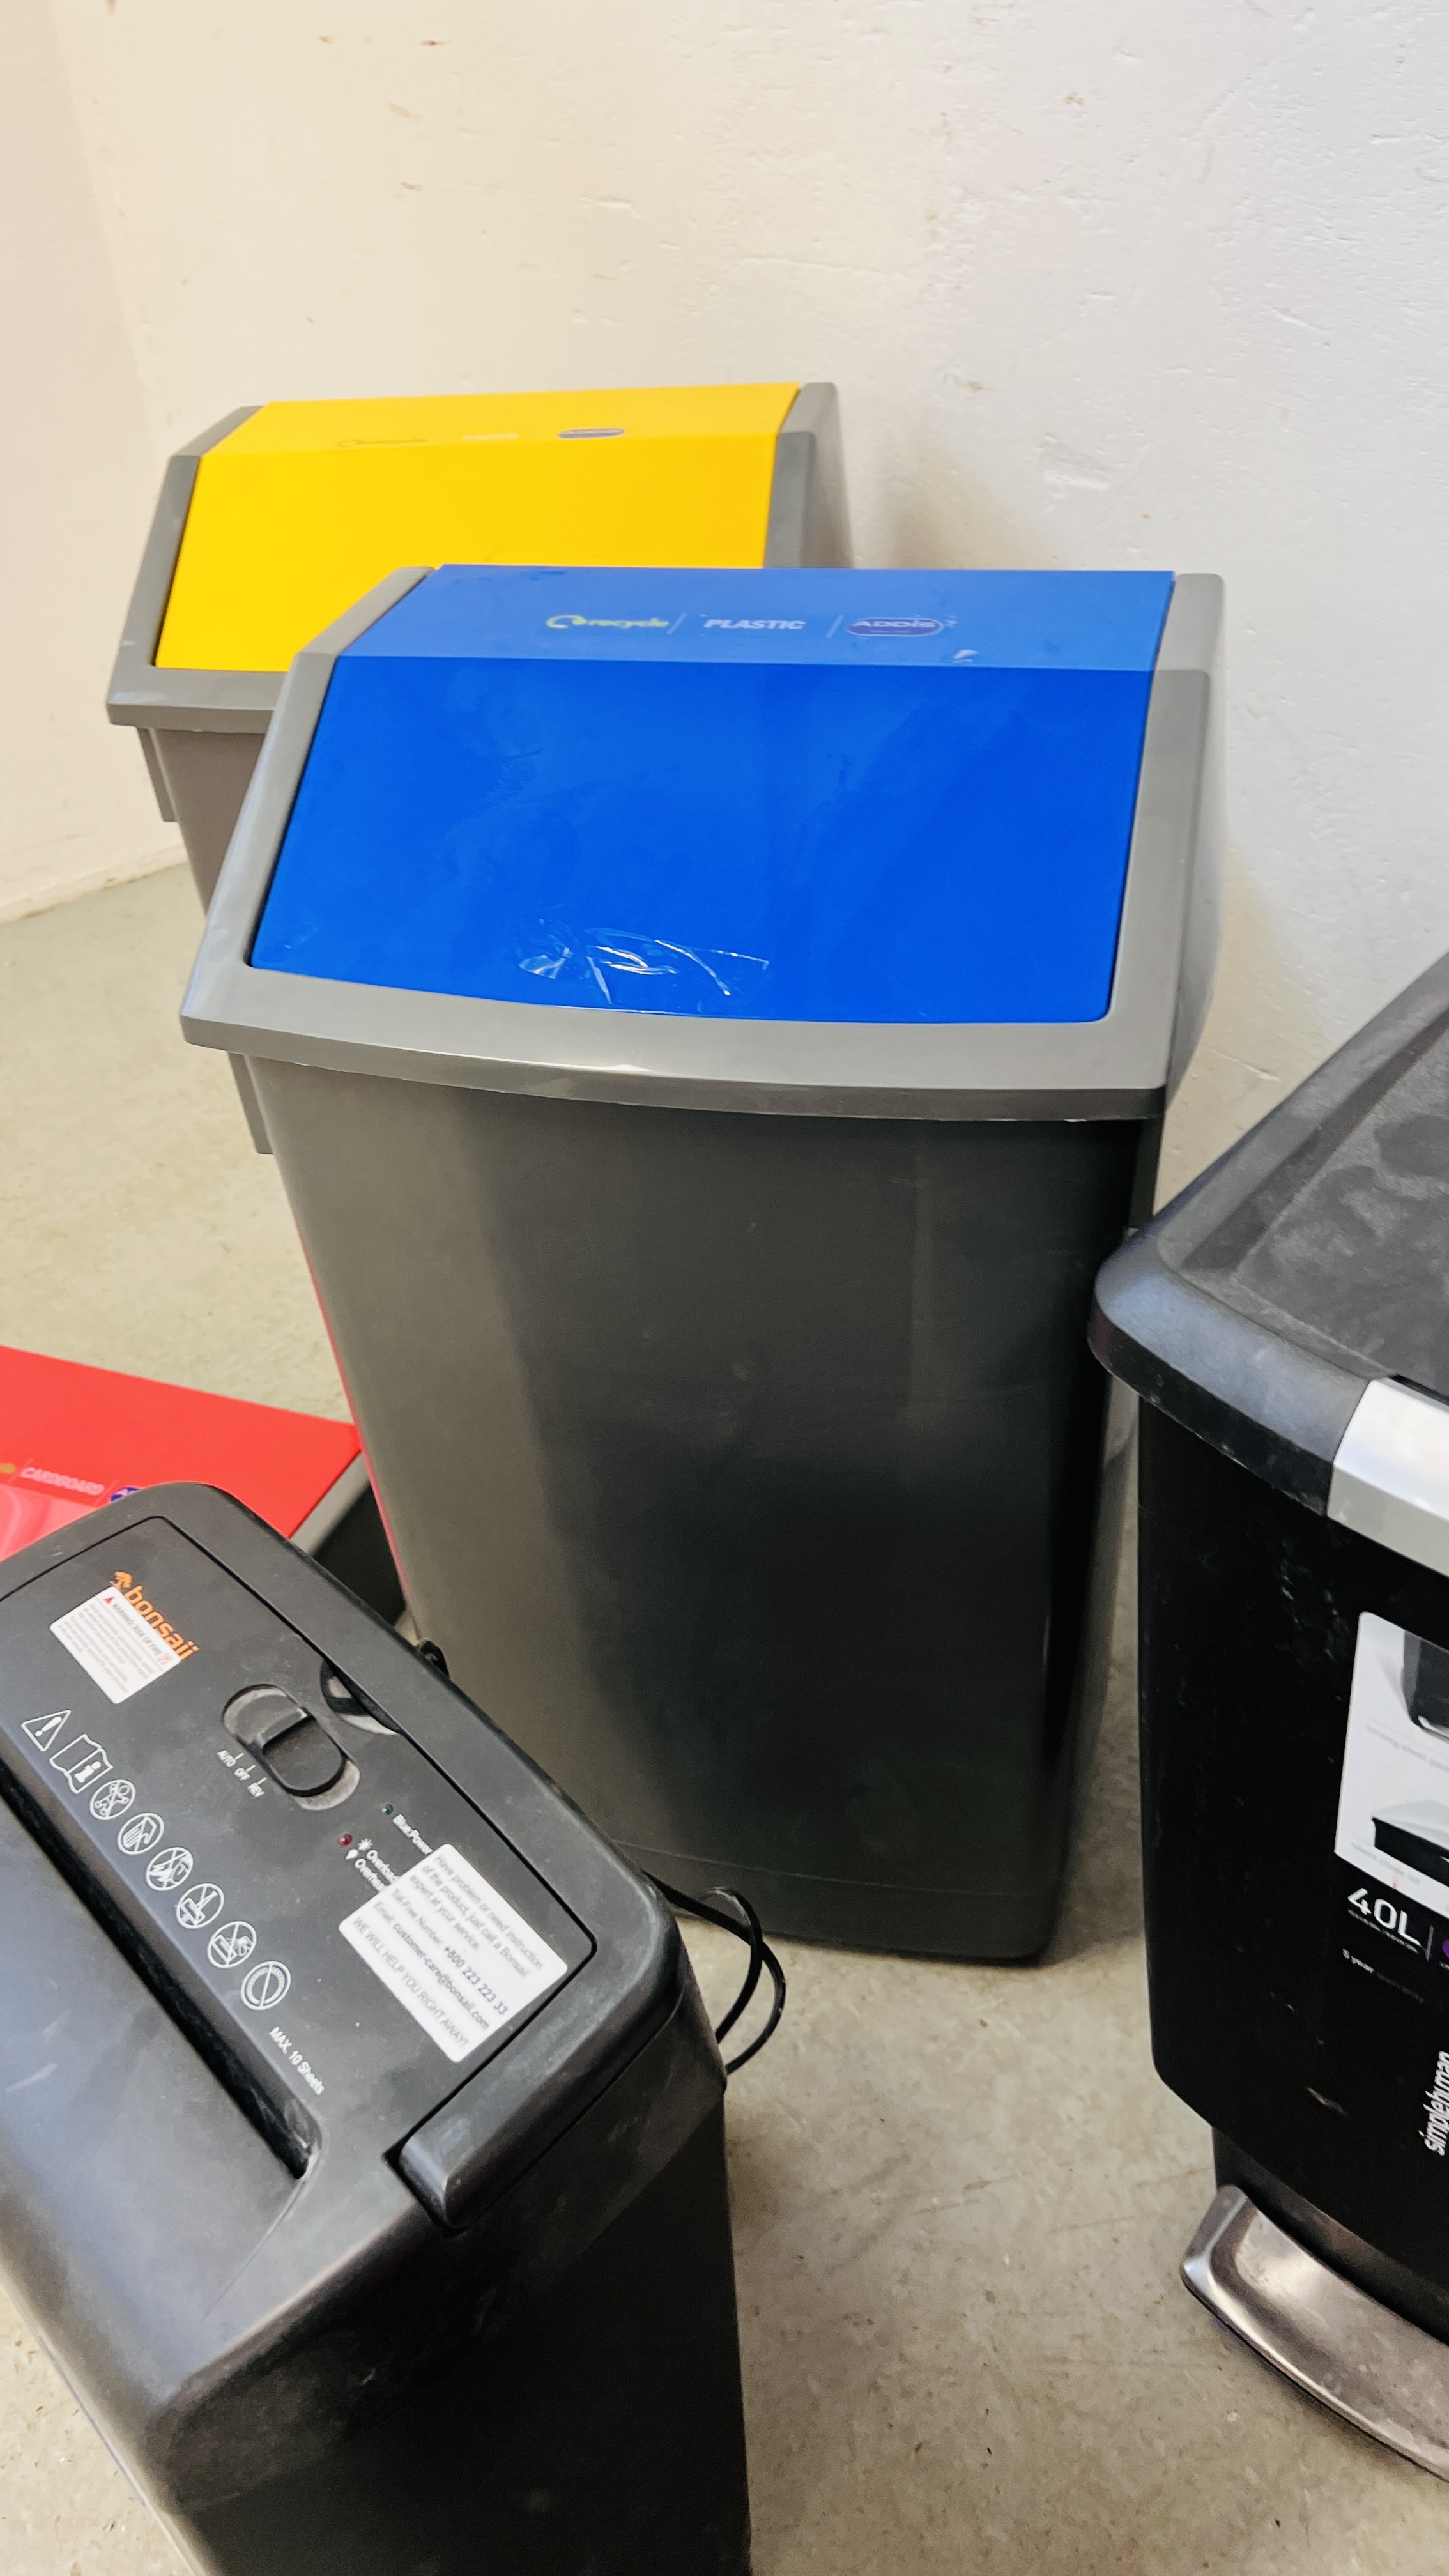 FOUR VARIOUS WASTE BINS AND TWO OFFICE PAPER SHREDDERS - SOLD AS SEEN. - Image 5 of 8